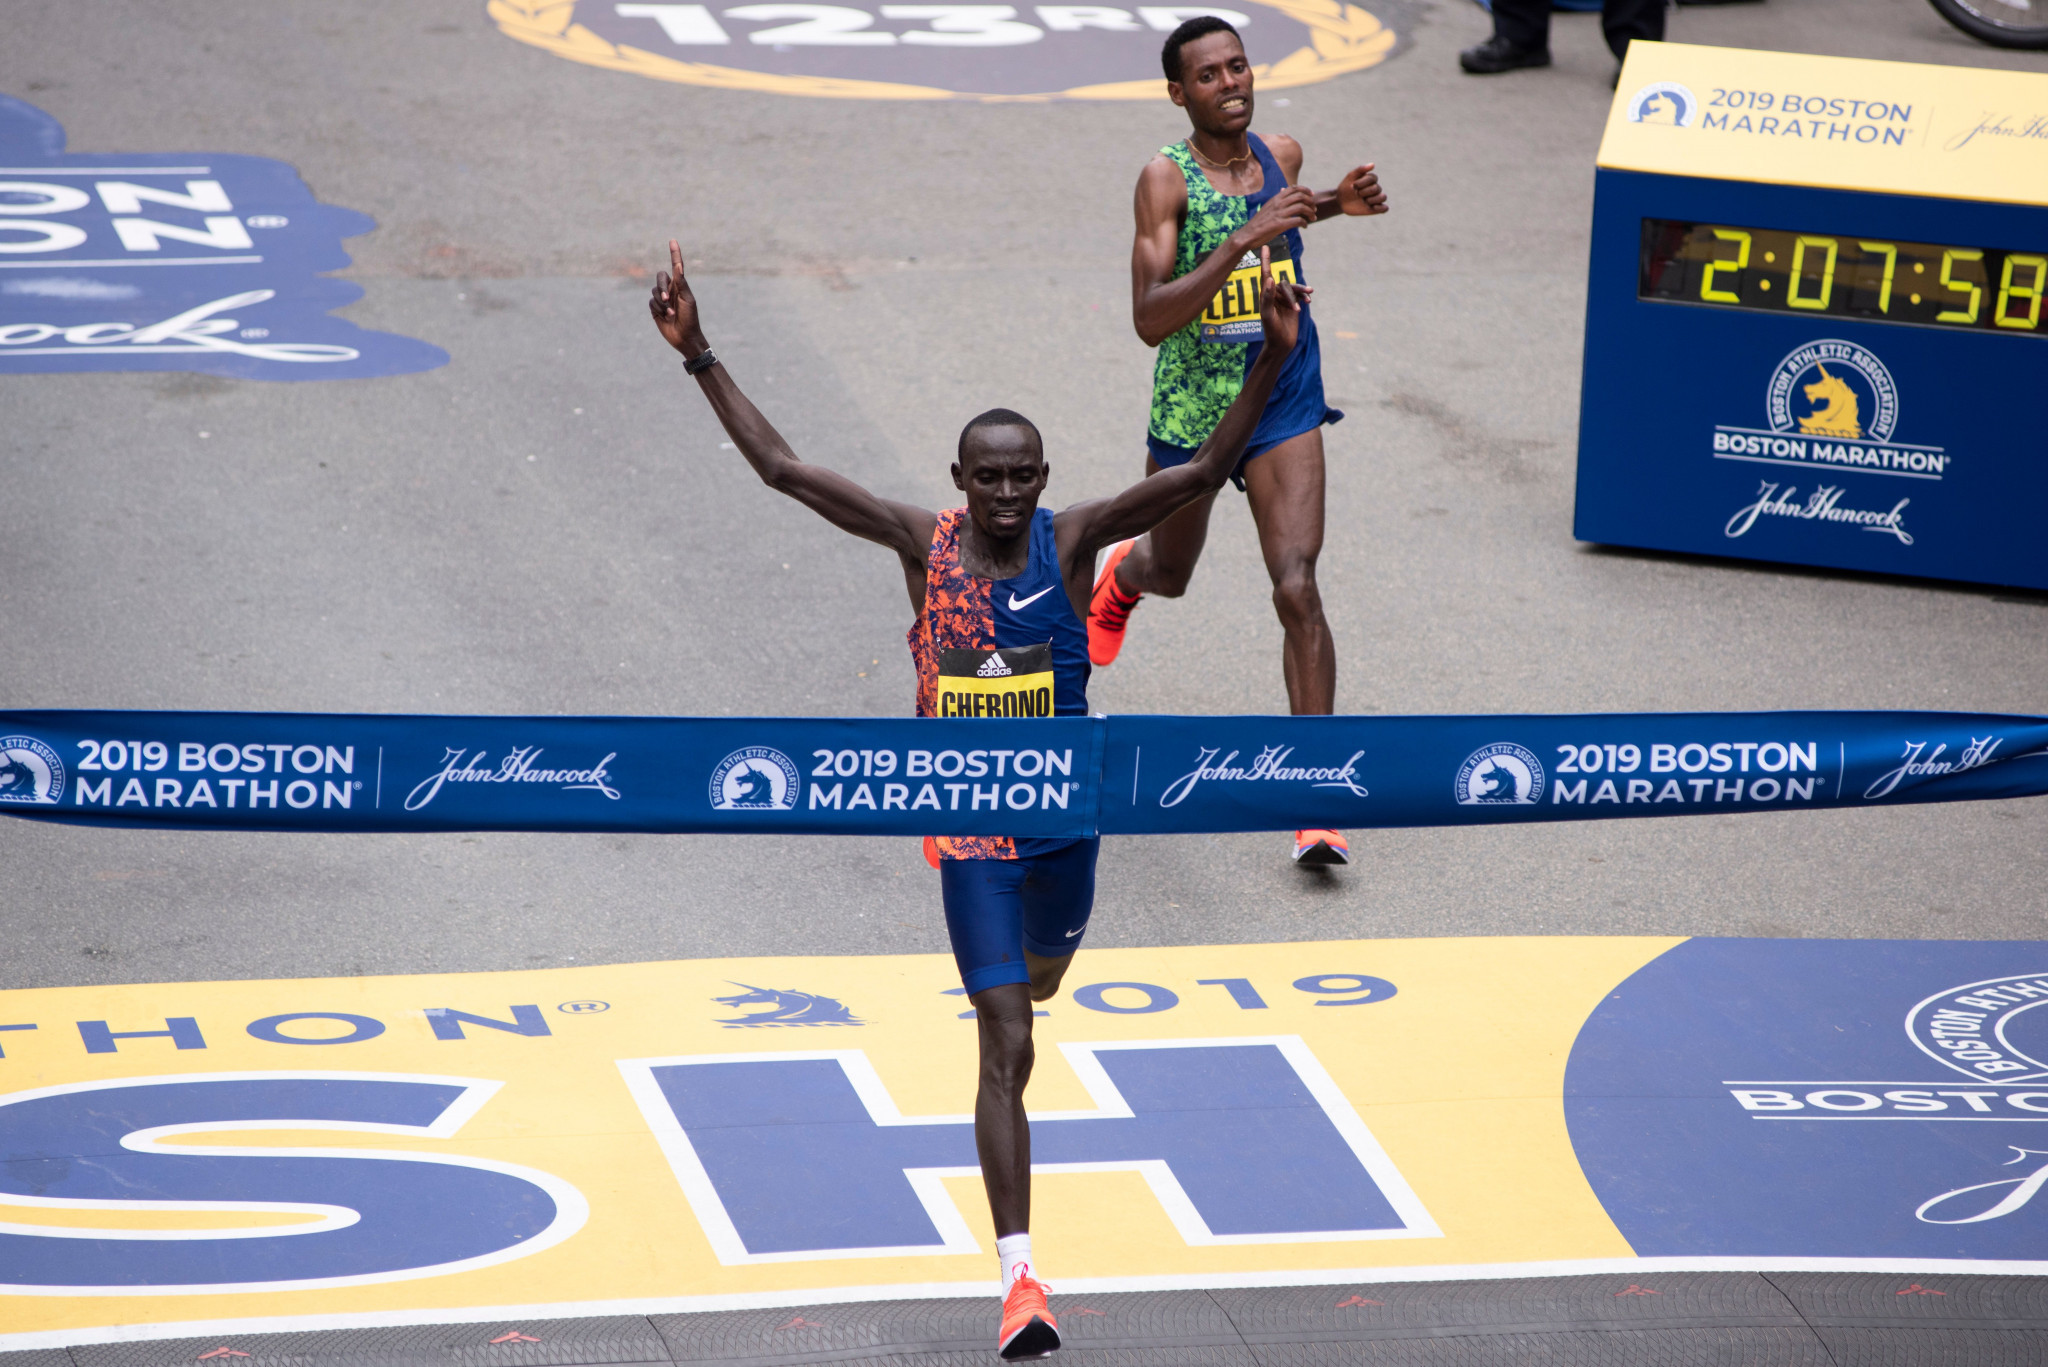 Lawrence Cherono celebrates his narrow win in last year's Boston Marathon men's race and will be back to defend his title in 2020 ©Getty Images